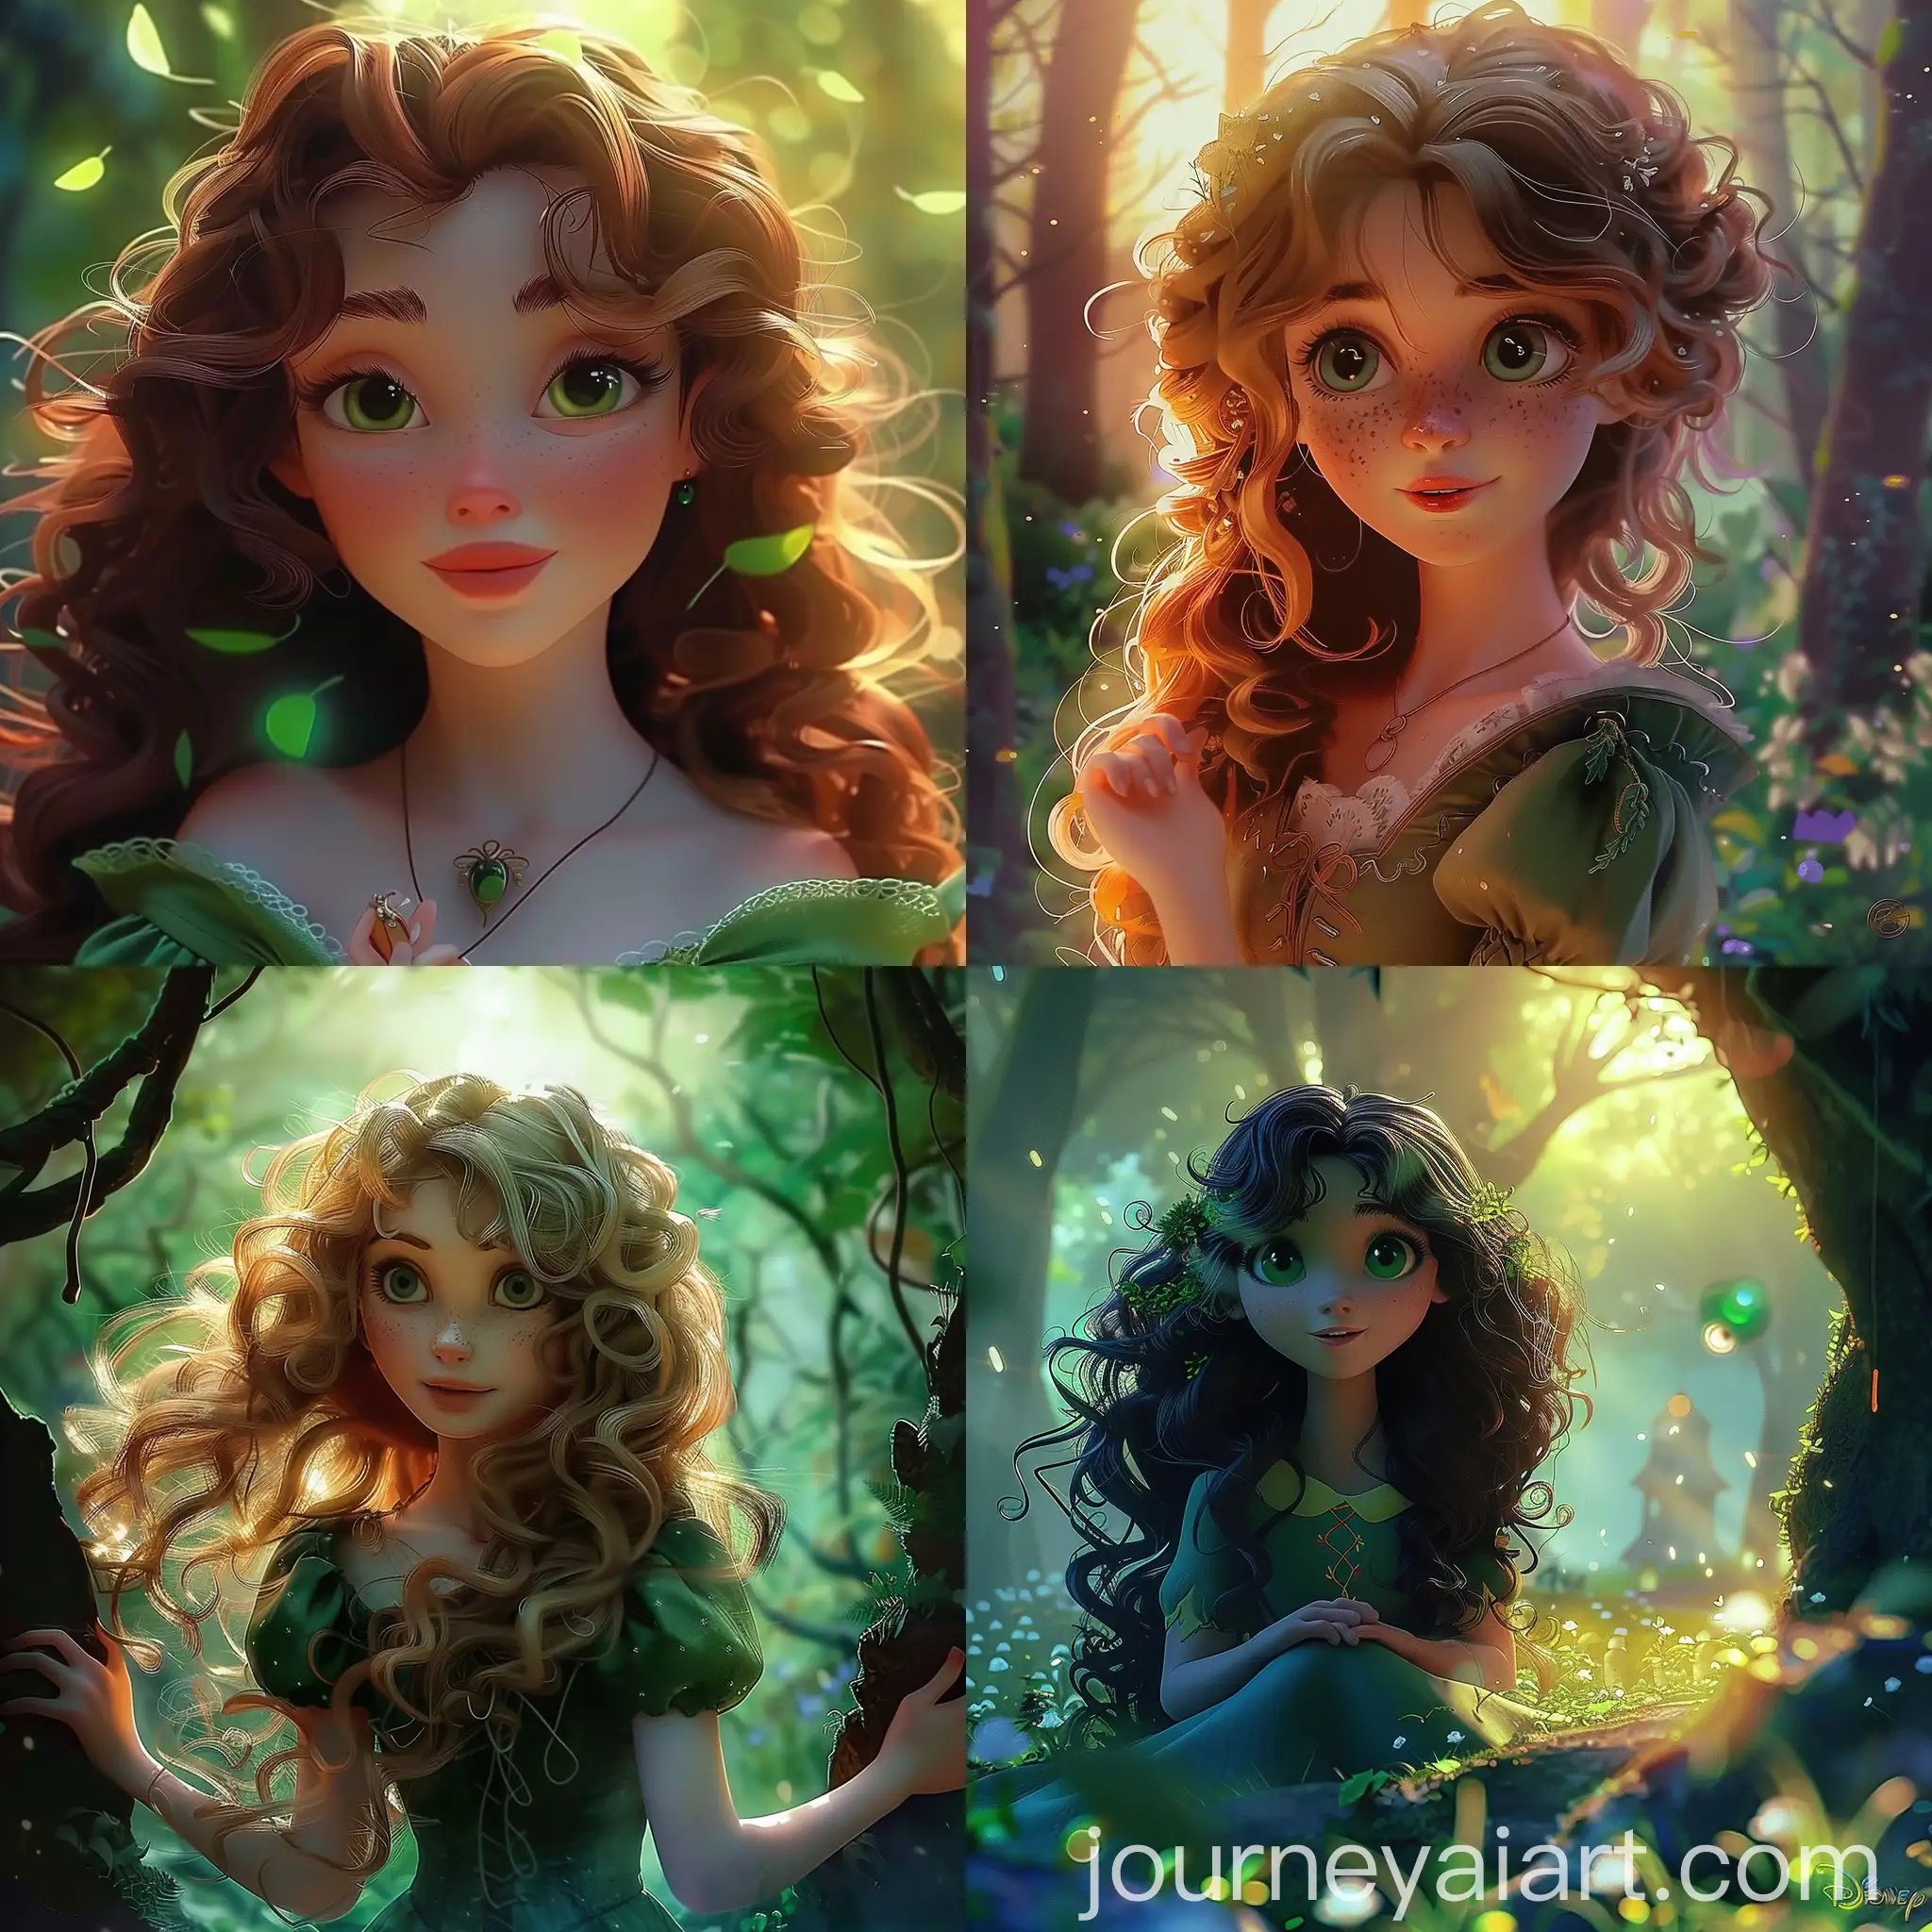 Enchanting-Forest-Girl-in-DisneyInspired-Beauty-Style